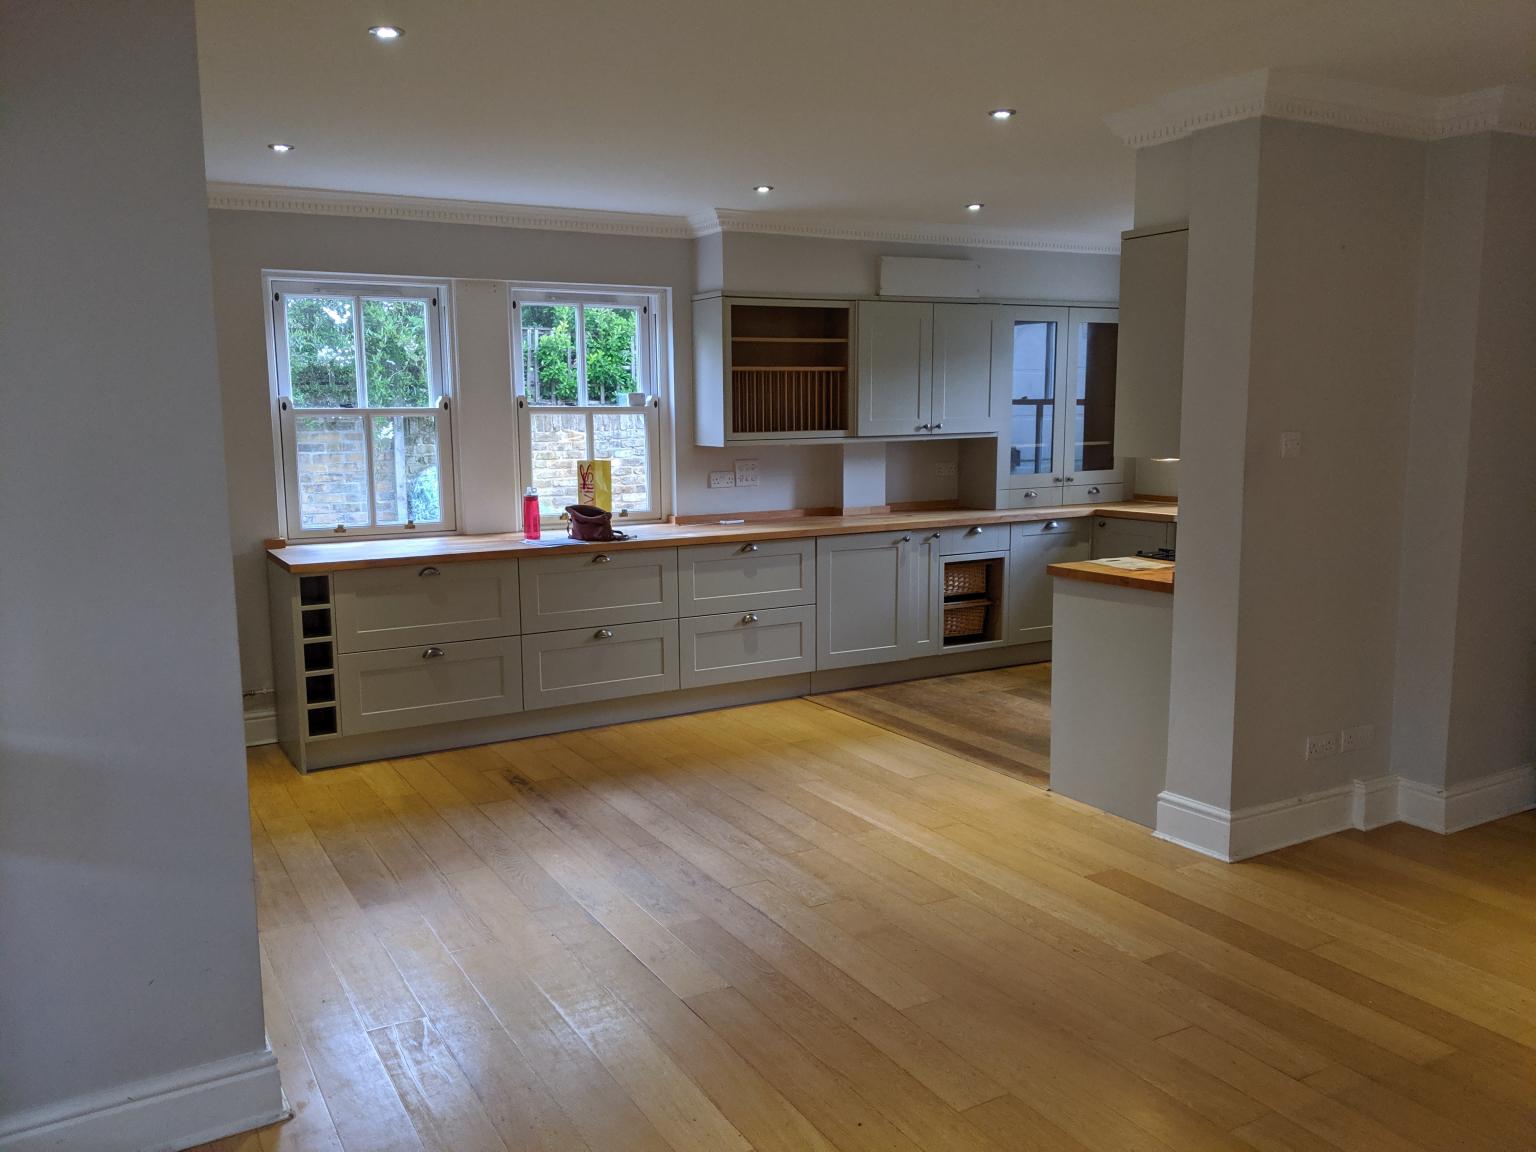 Selling Kitchen Cabinets And More In Sw15 London Borough Of